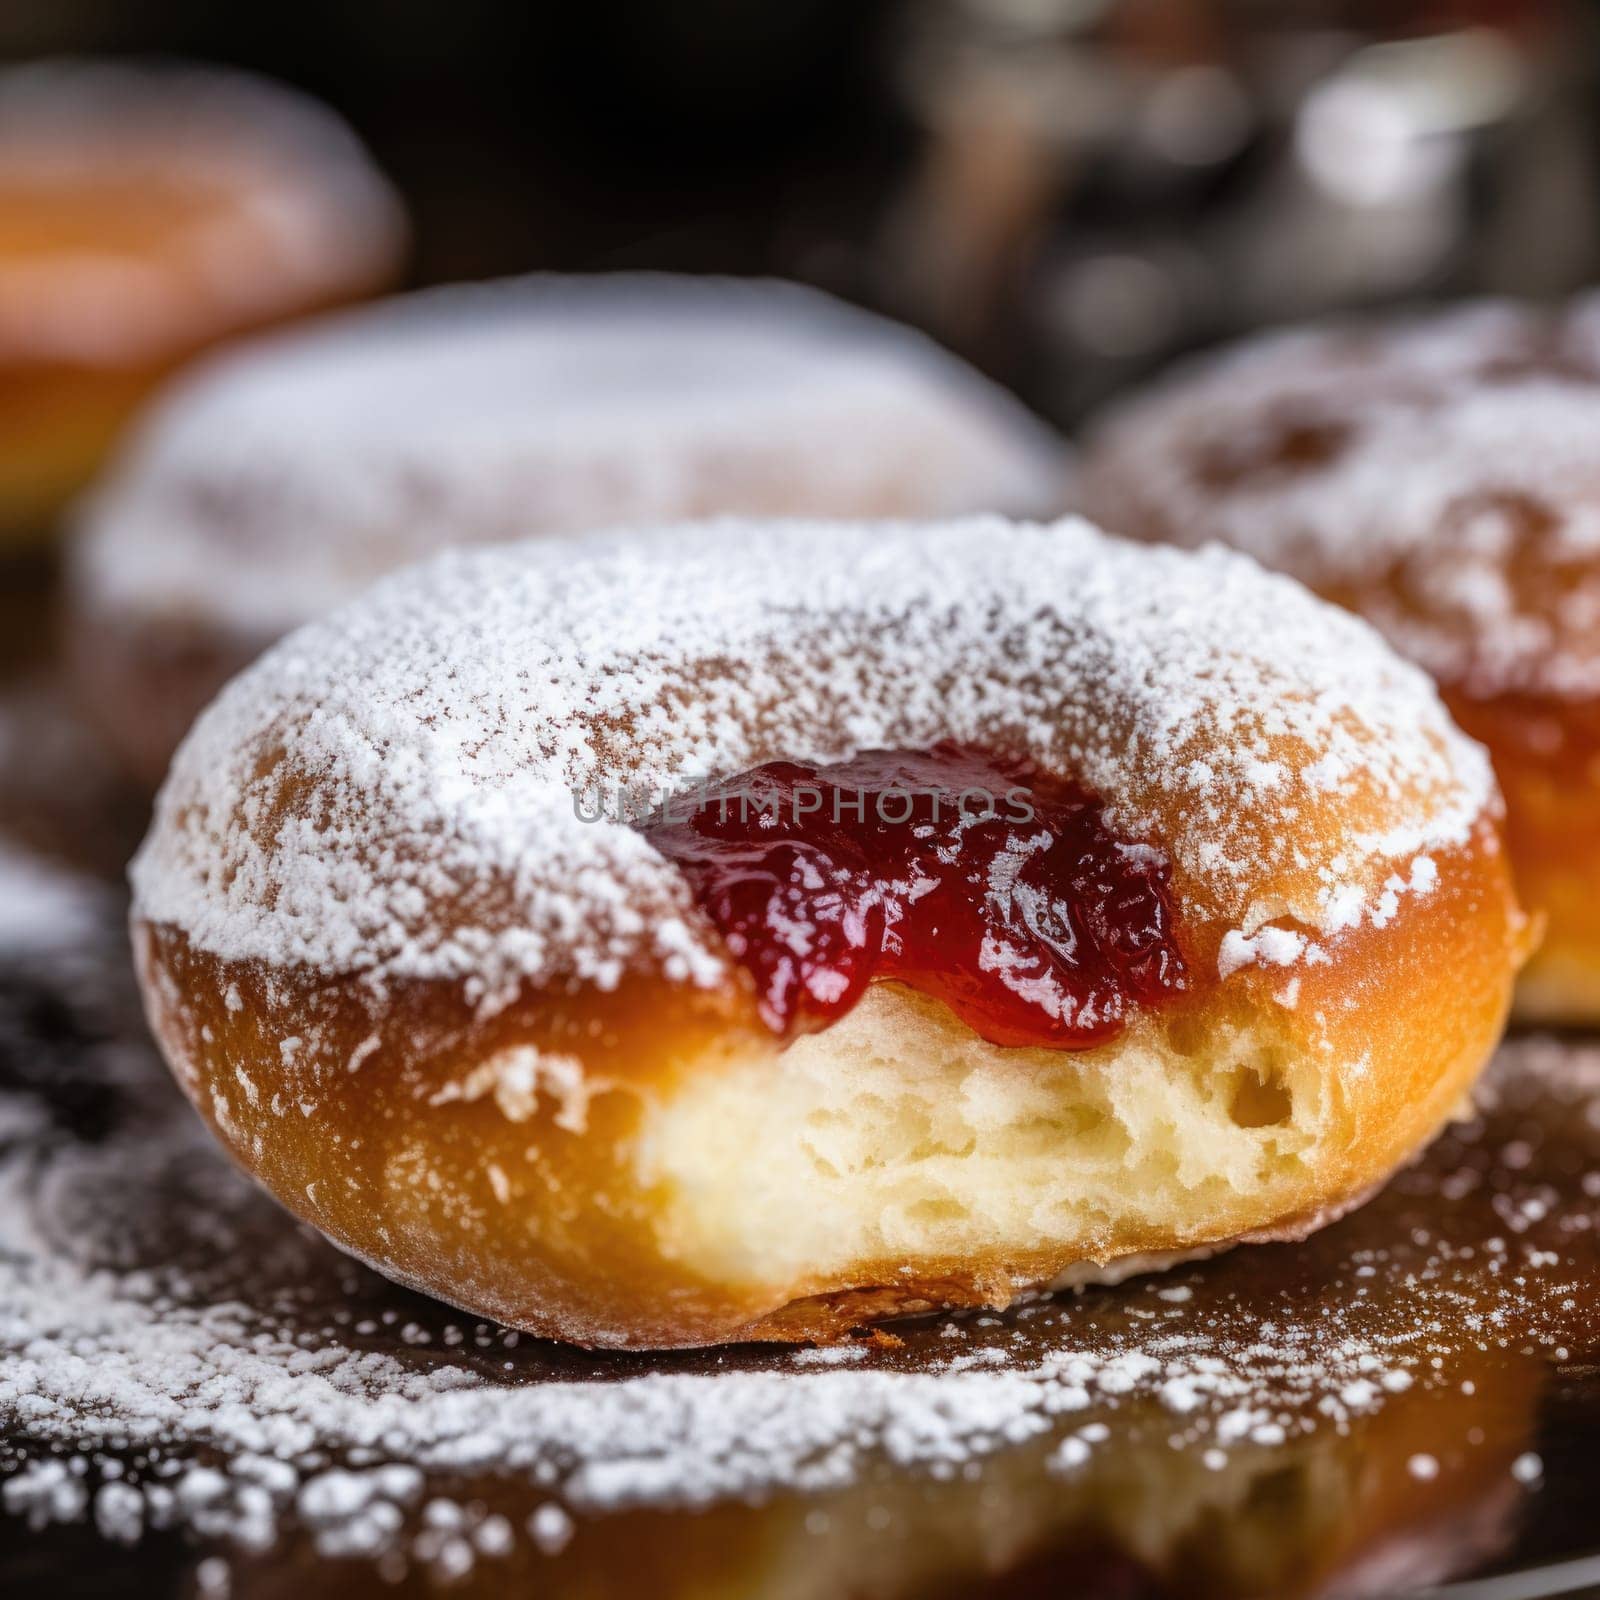 A close up of a donut with powdered sugar and jam, AI by starush